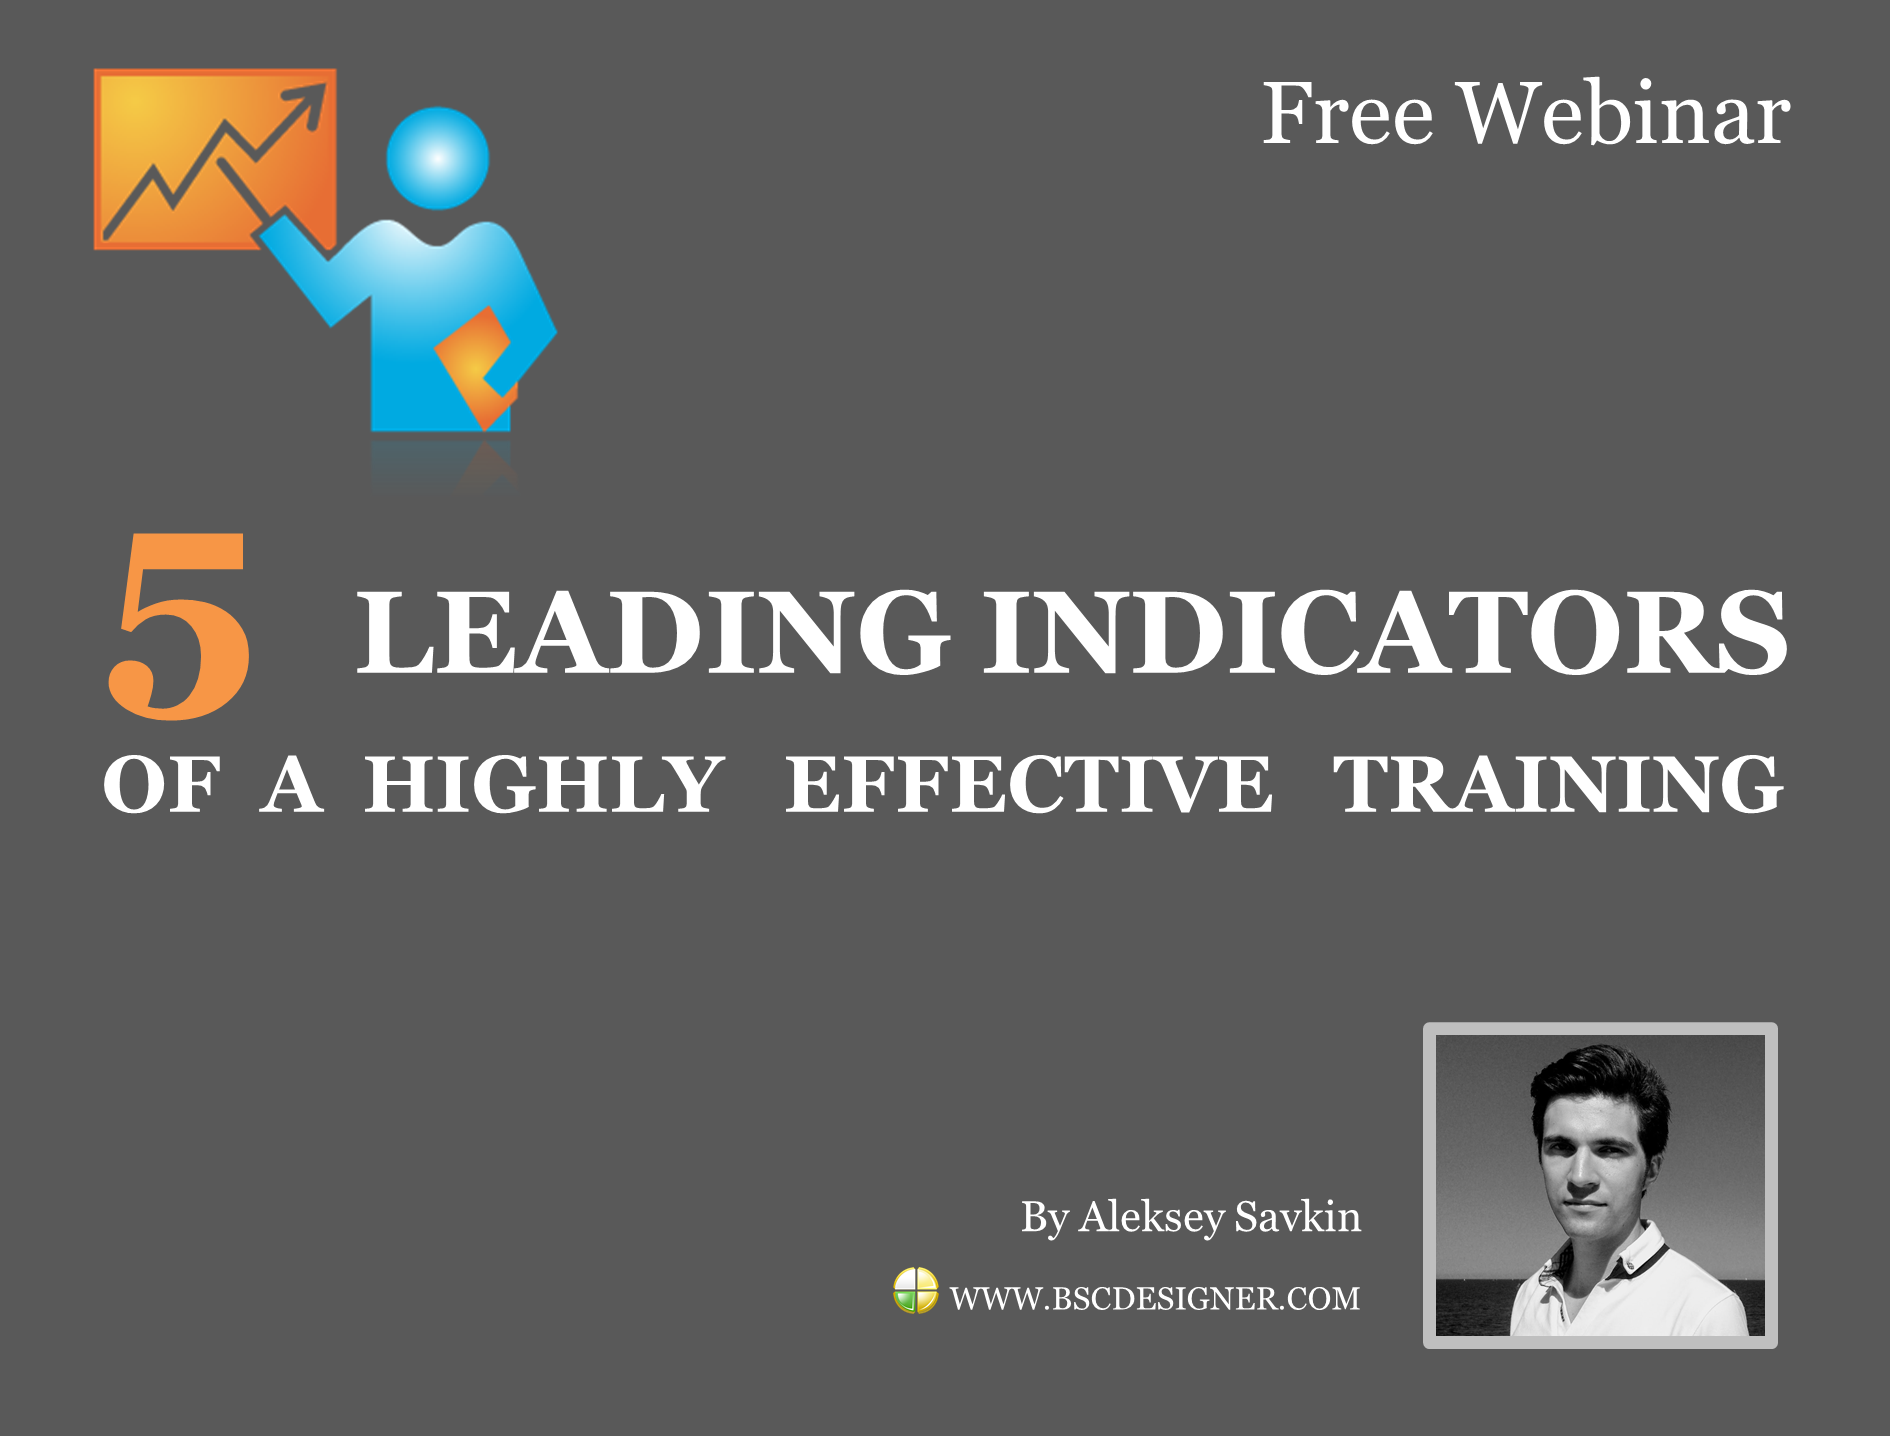 5 leading indicators of a highly effective training